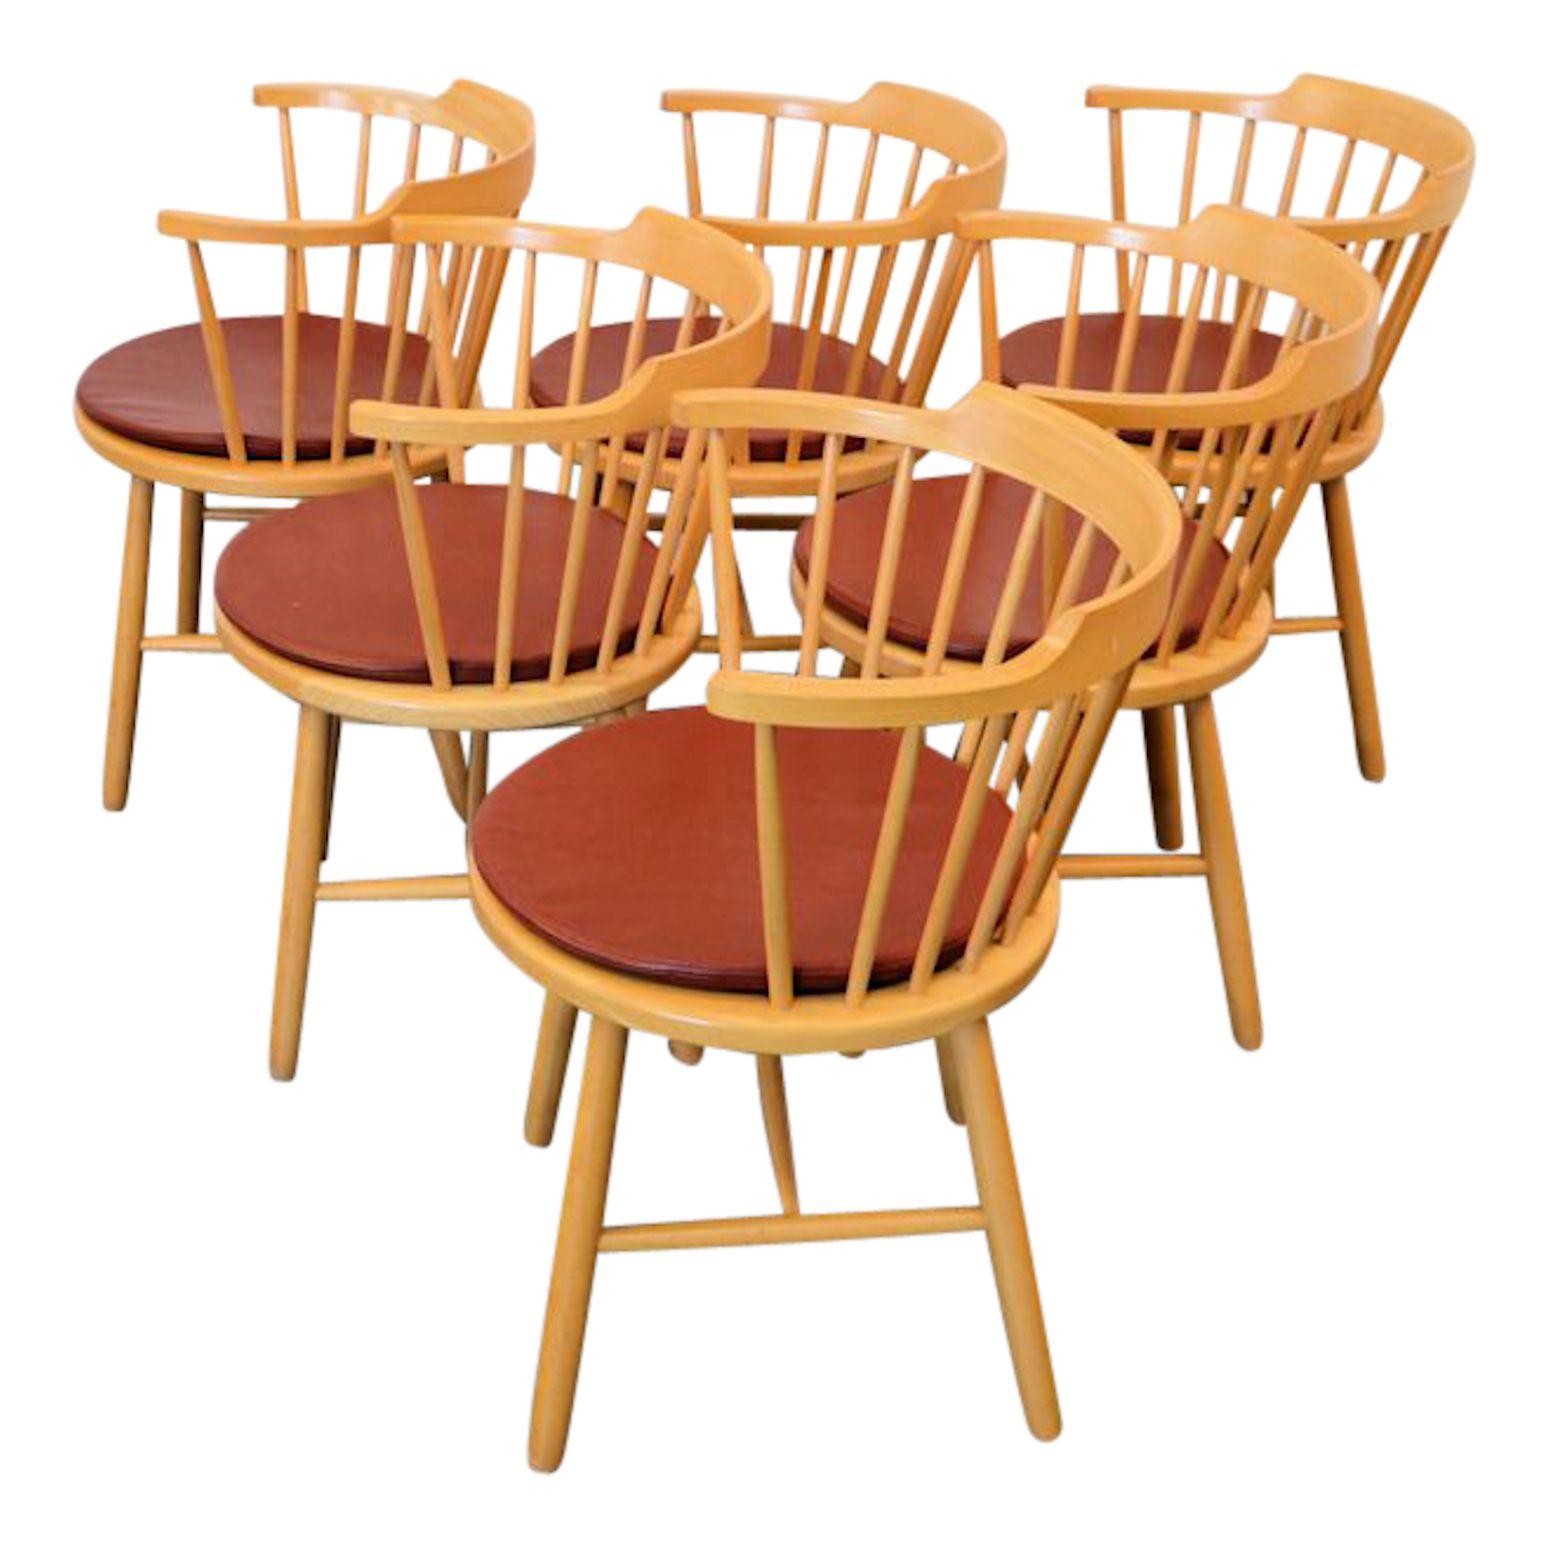 Set of six vintage Danish design dining chairs designed by worldwide known and appreciated furniture designer Børge Mogensen for manufacturer Fredericia. Mogensen was one of the most important among a generation of furniture designers who made the